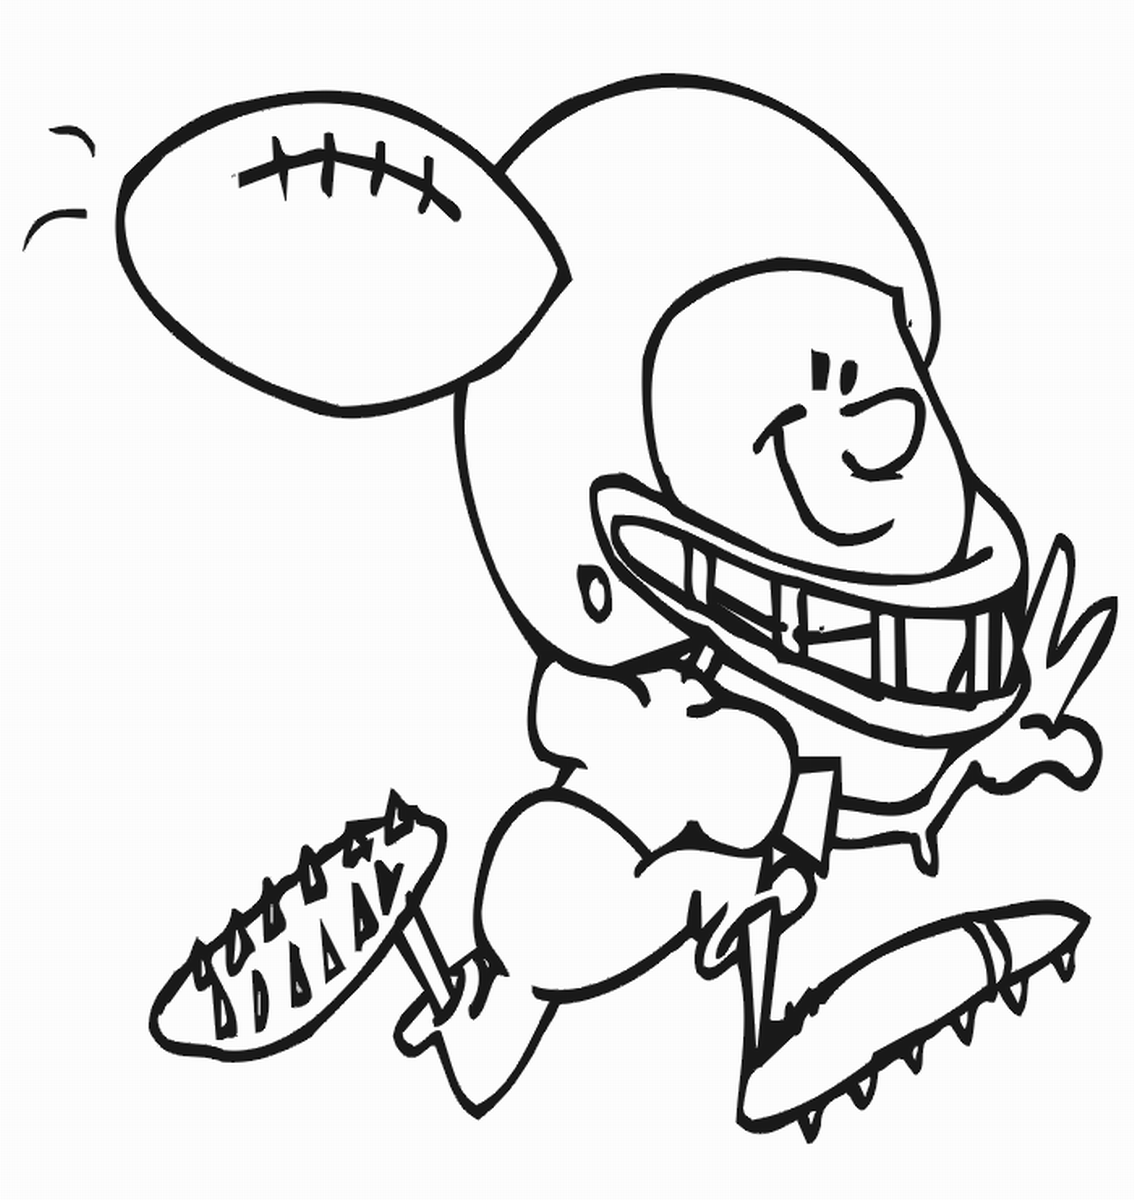 Football Coloring Pages for boys free football sheets Printable 2020 0400 Coloring4free